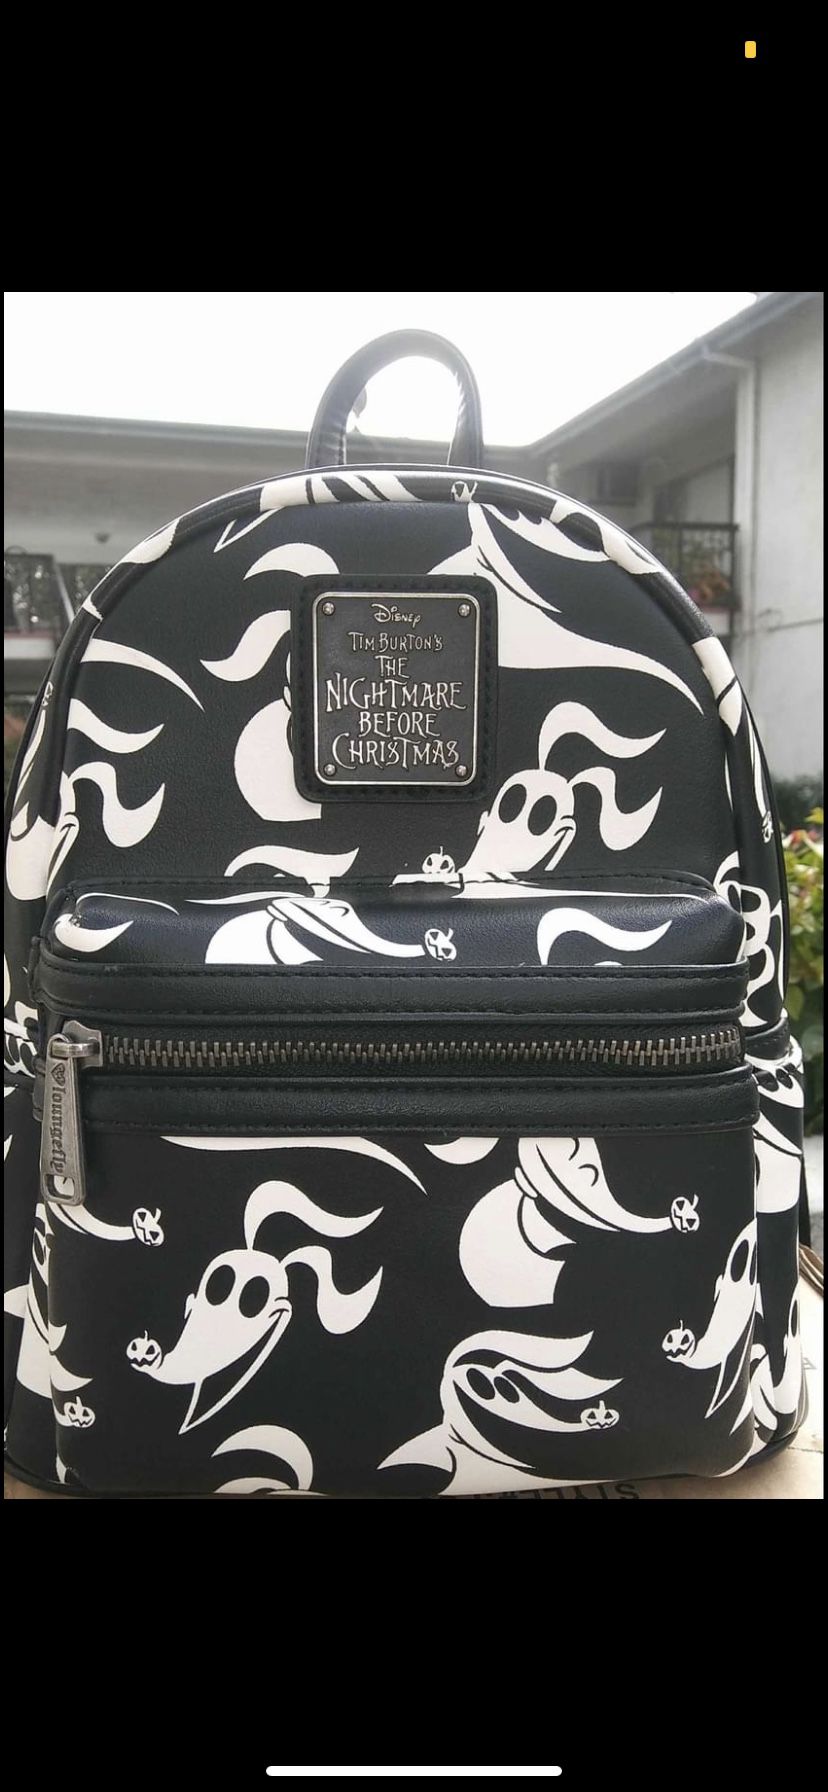 NOT MY PIC ISO THIS BAG. Starbucks cups to trade